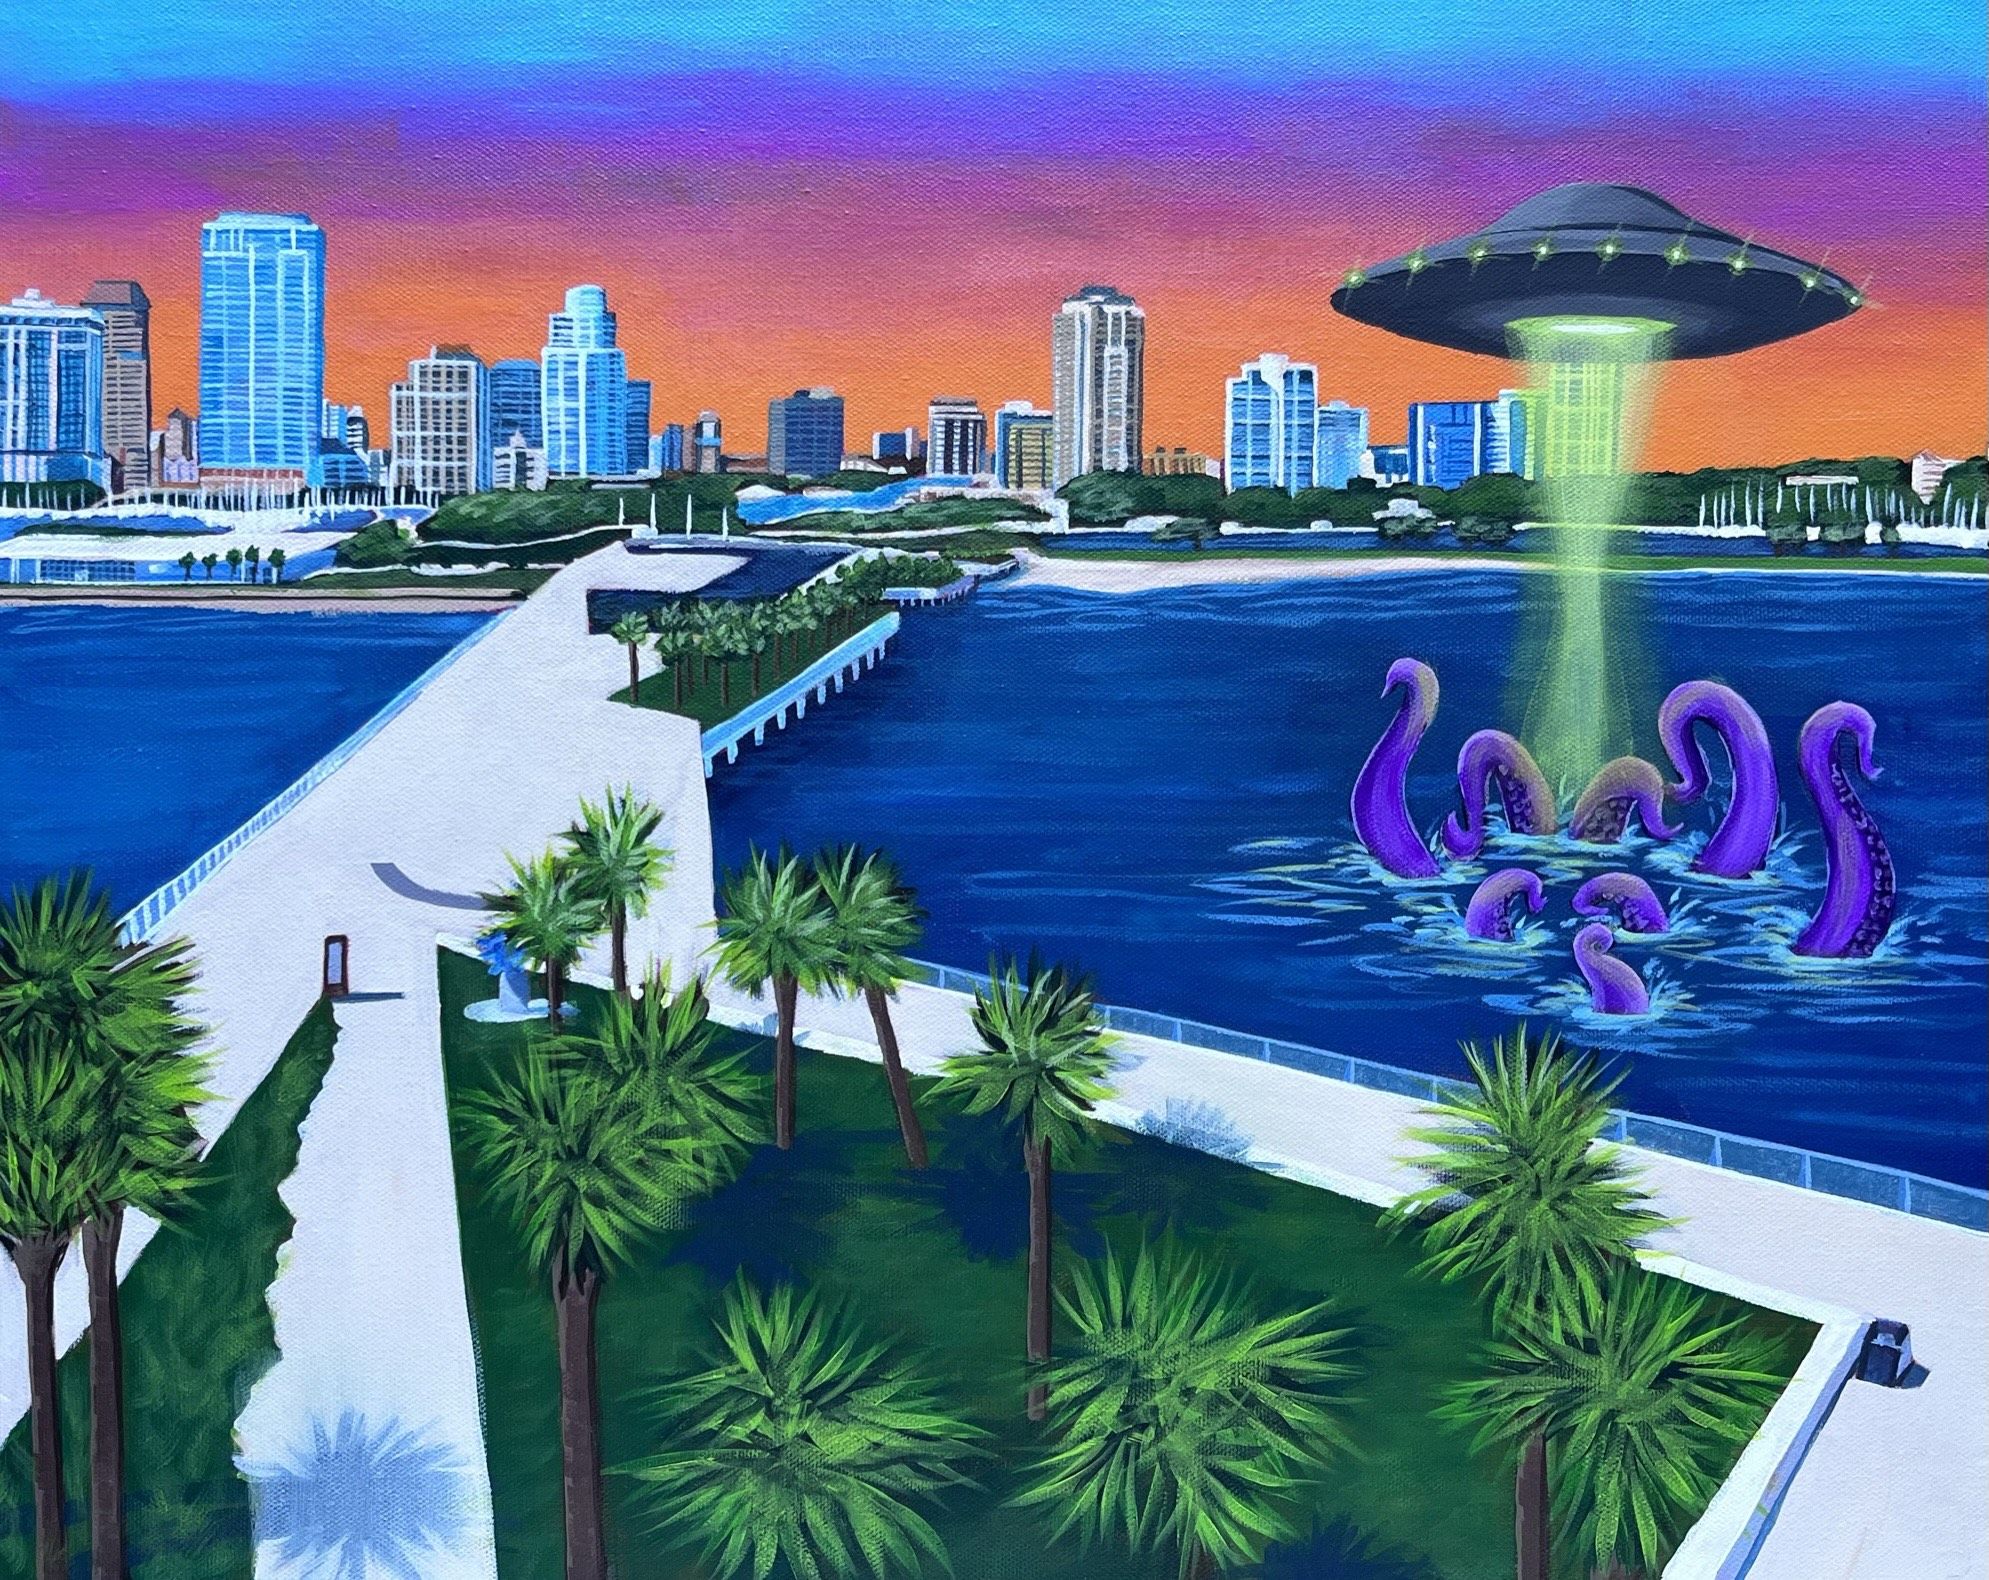 A painting of the St. Pete Pier and St. Petersburg skyline at sunset with purple tentacles curling out of the water and a flying saucer hovering overhead with a light beaming down.